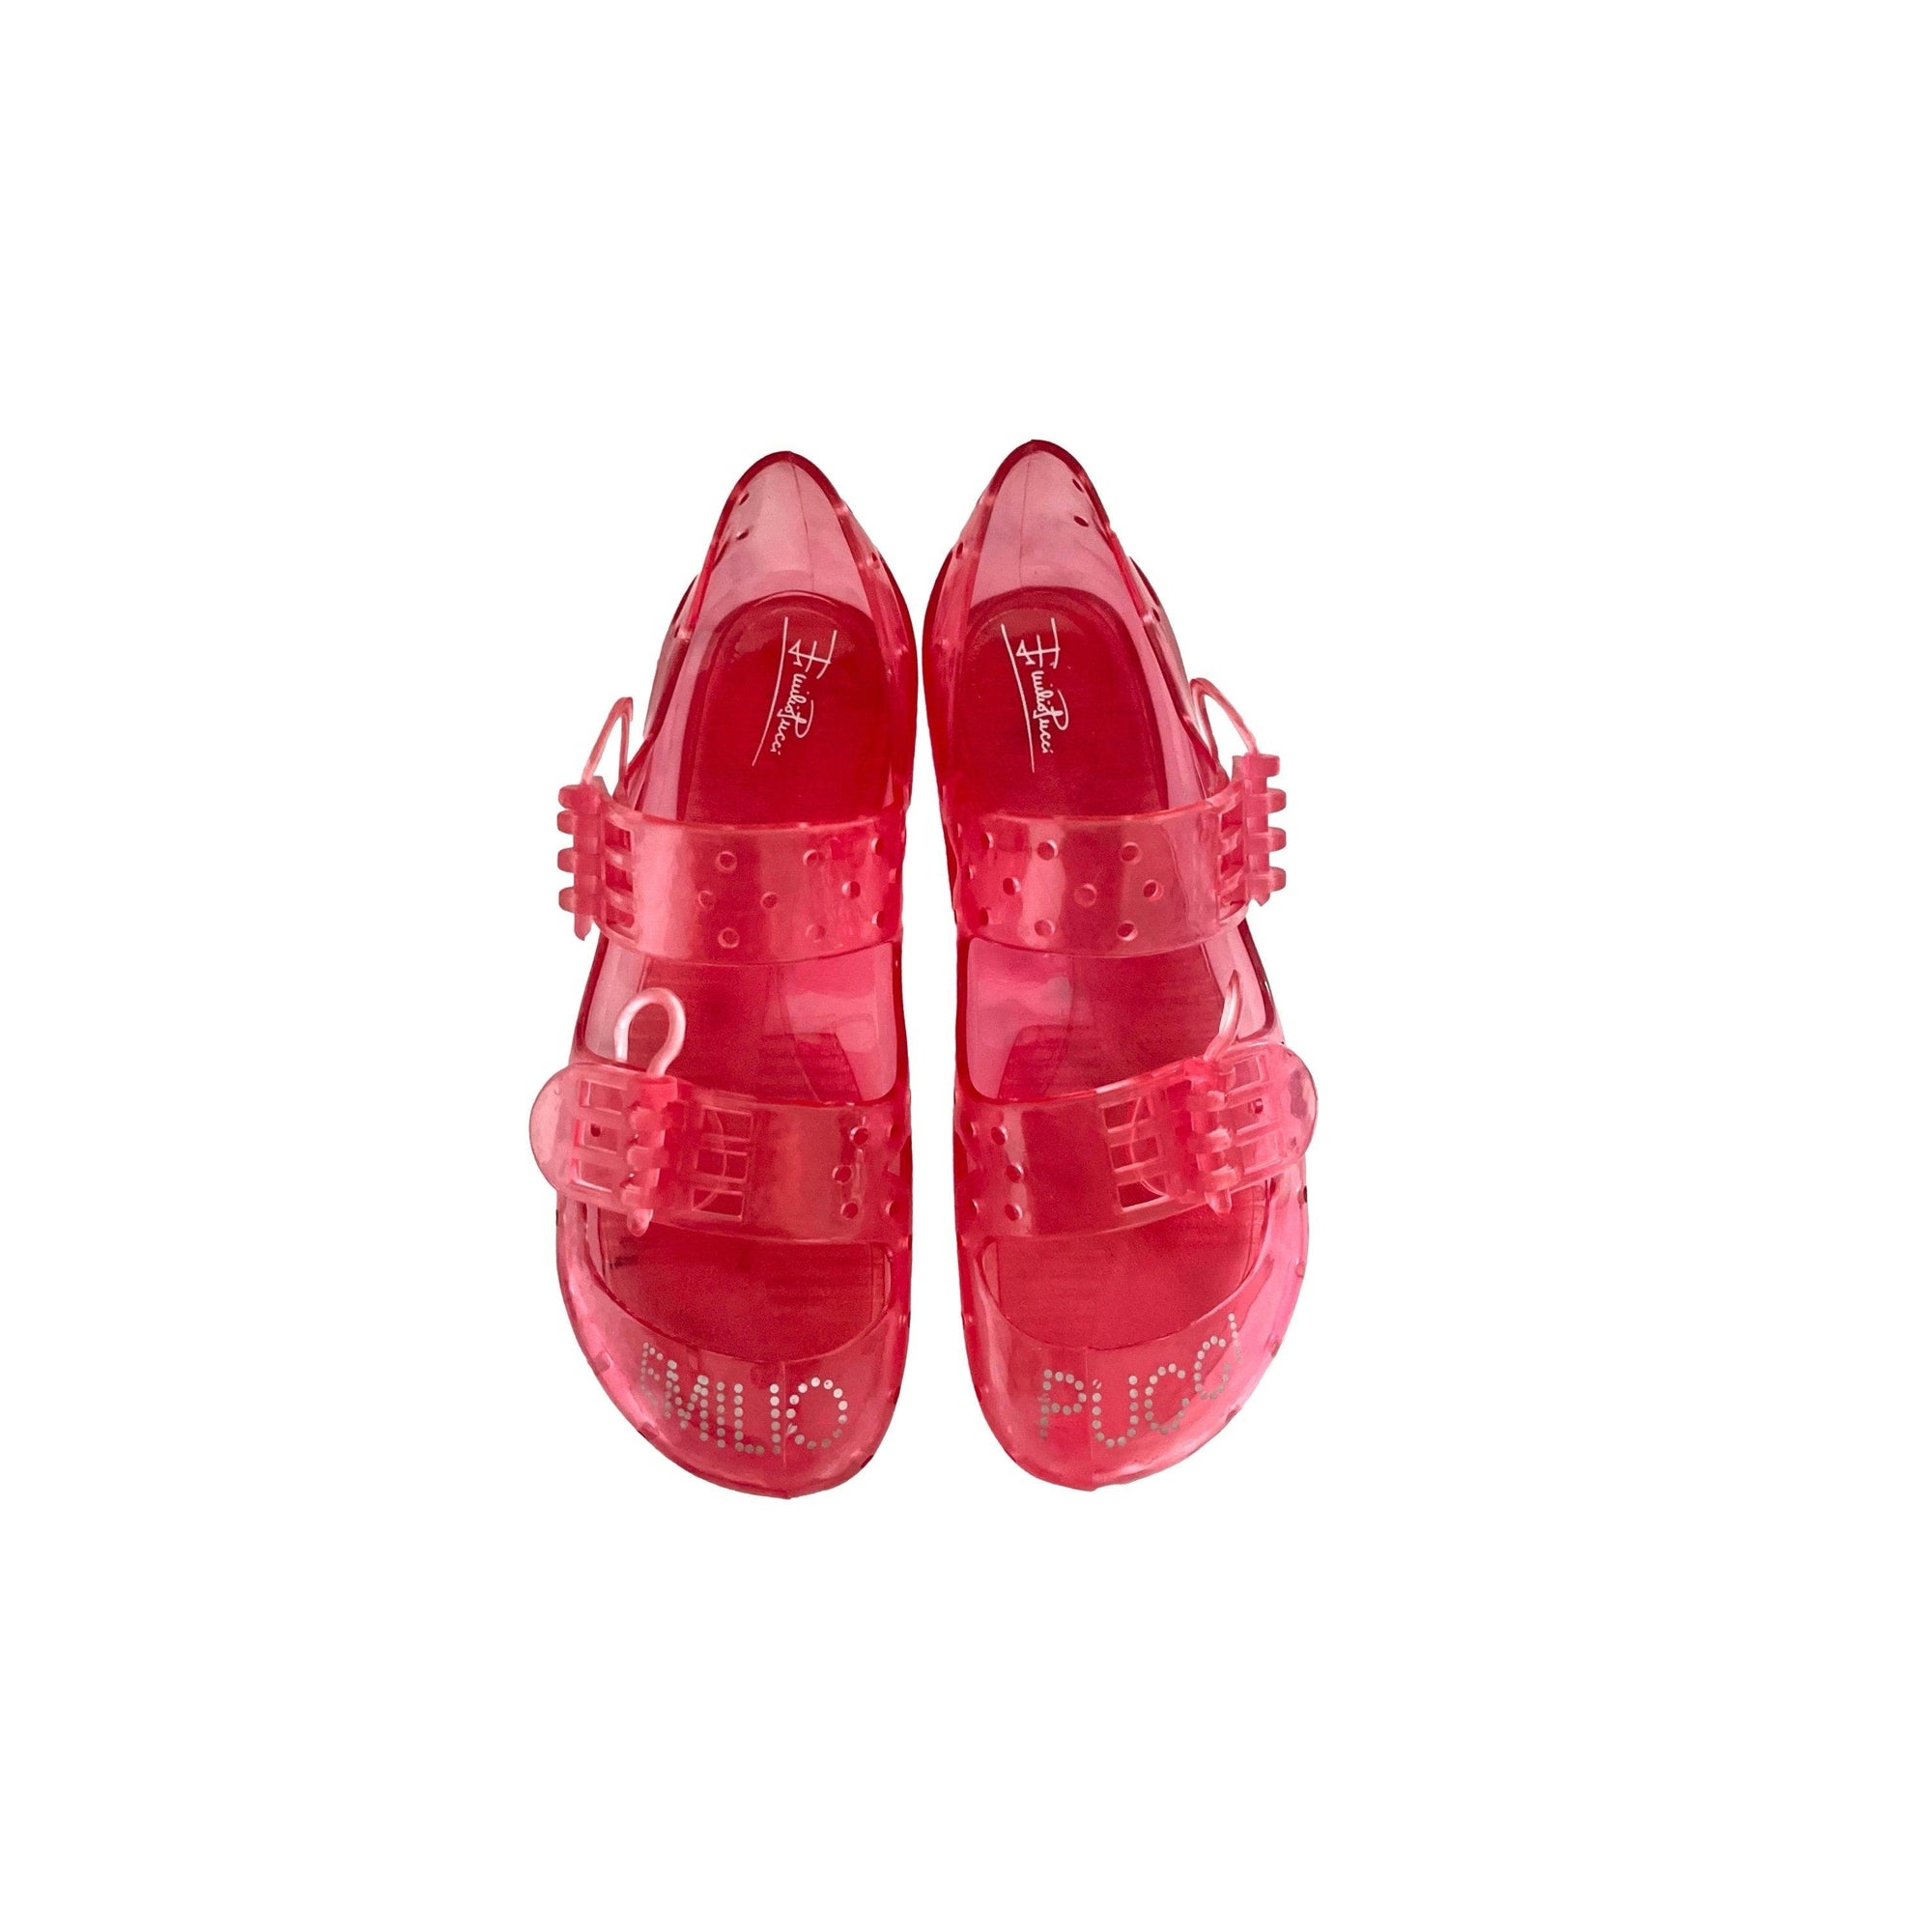 Pucci Strawberry Jelly Shoes - Shoes